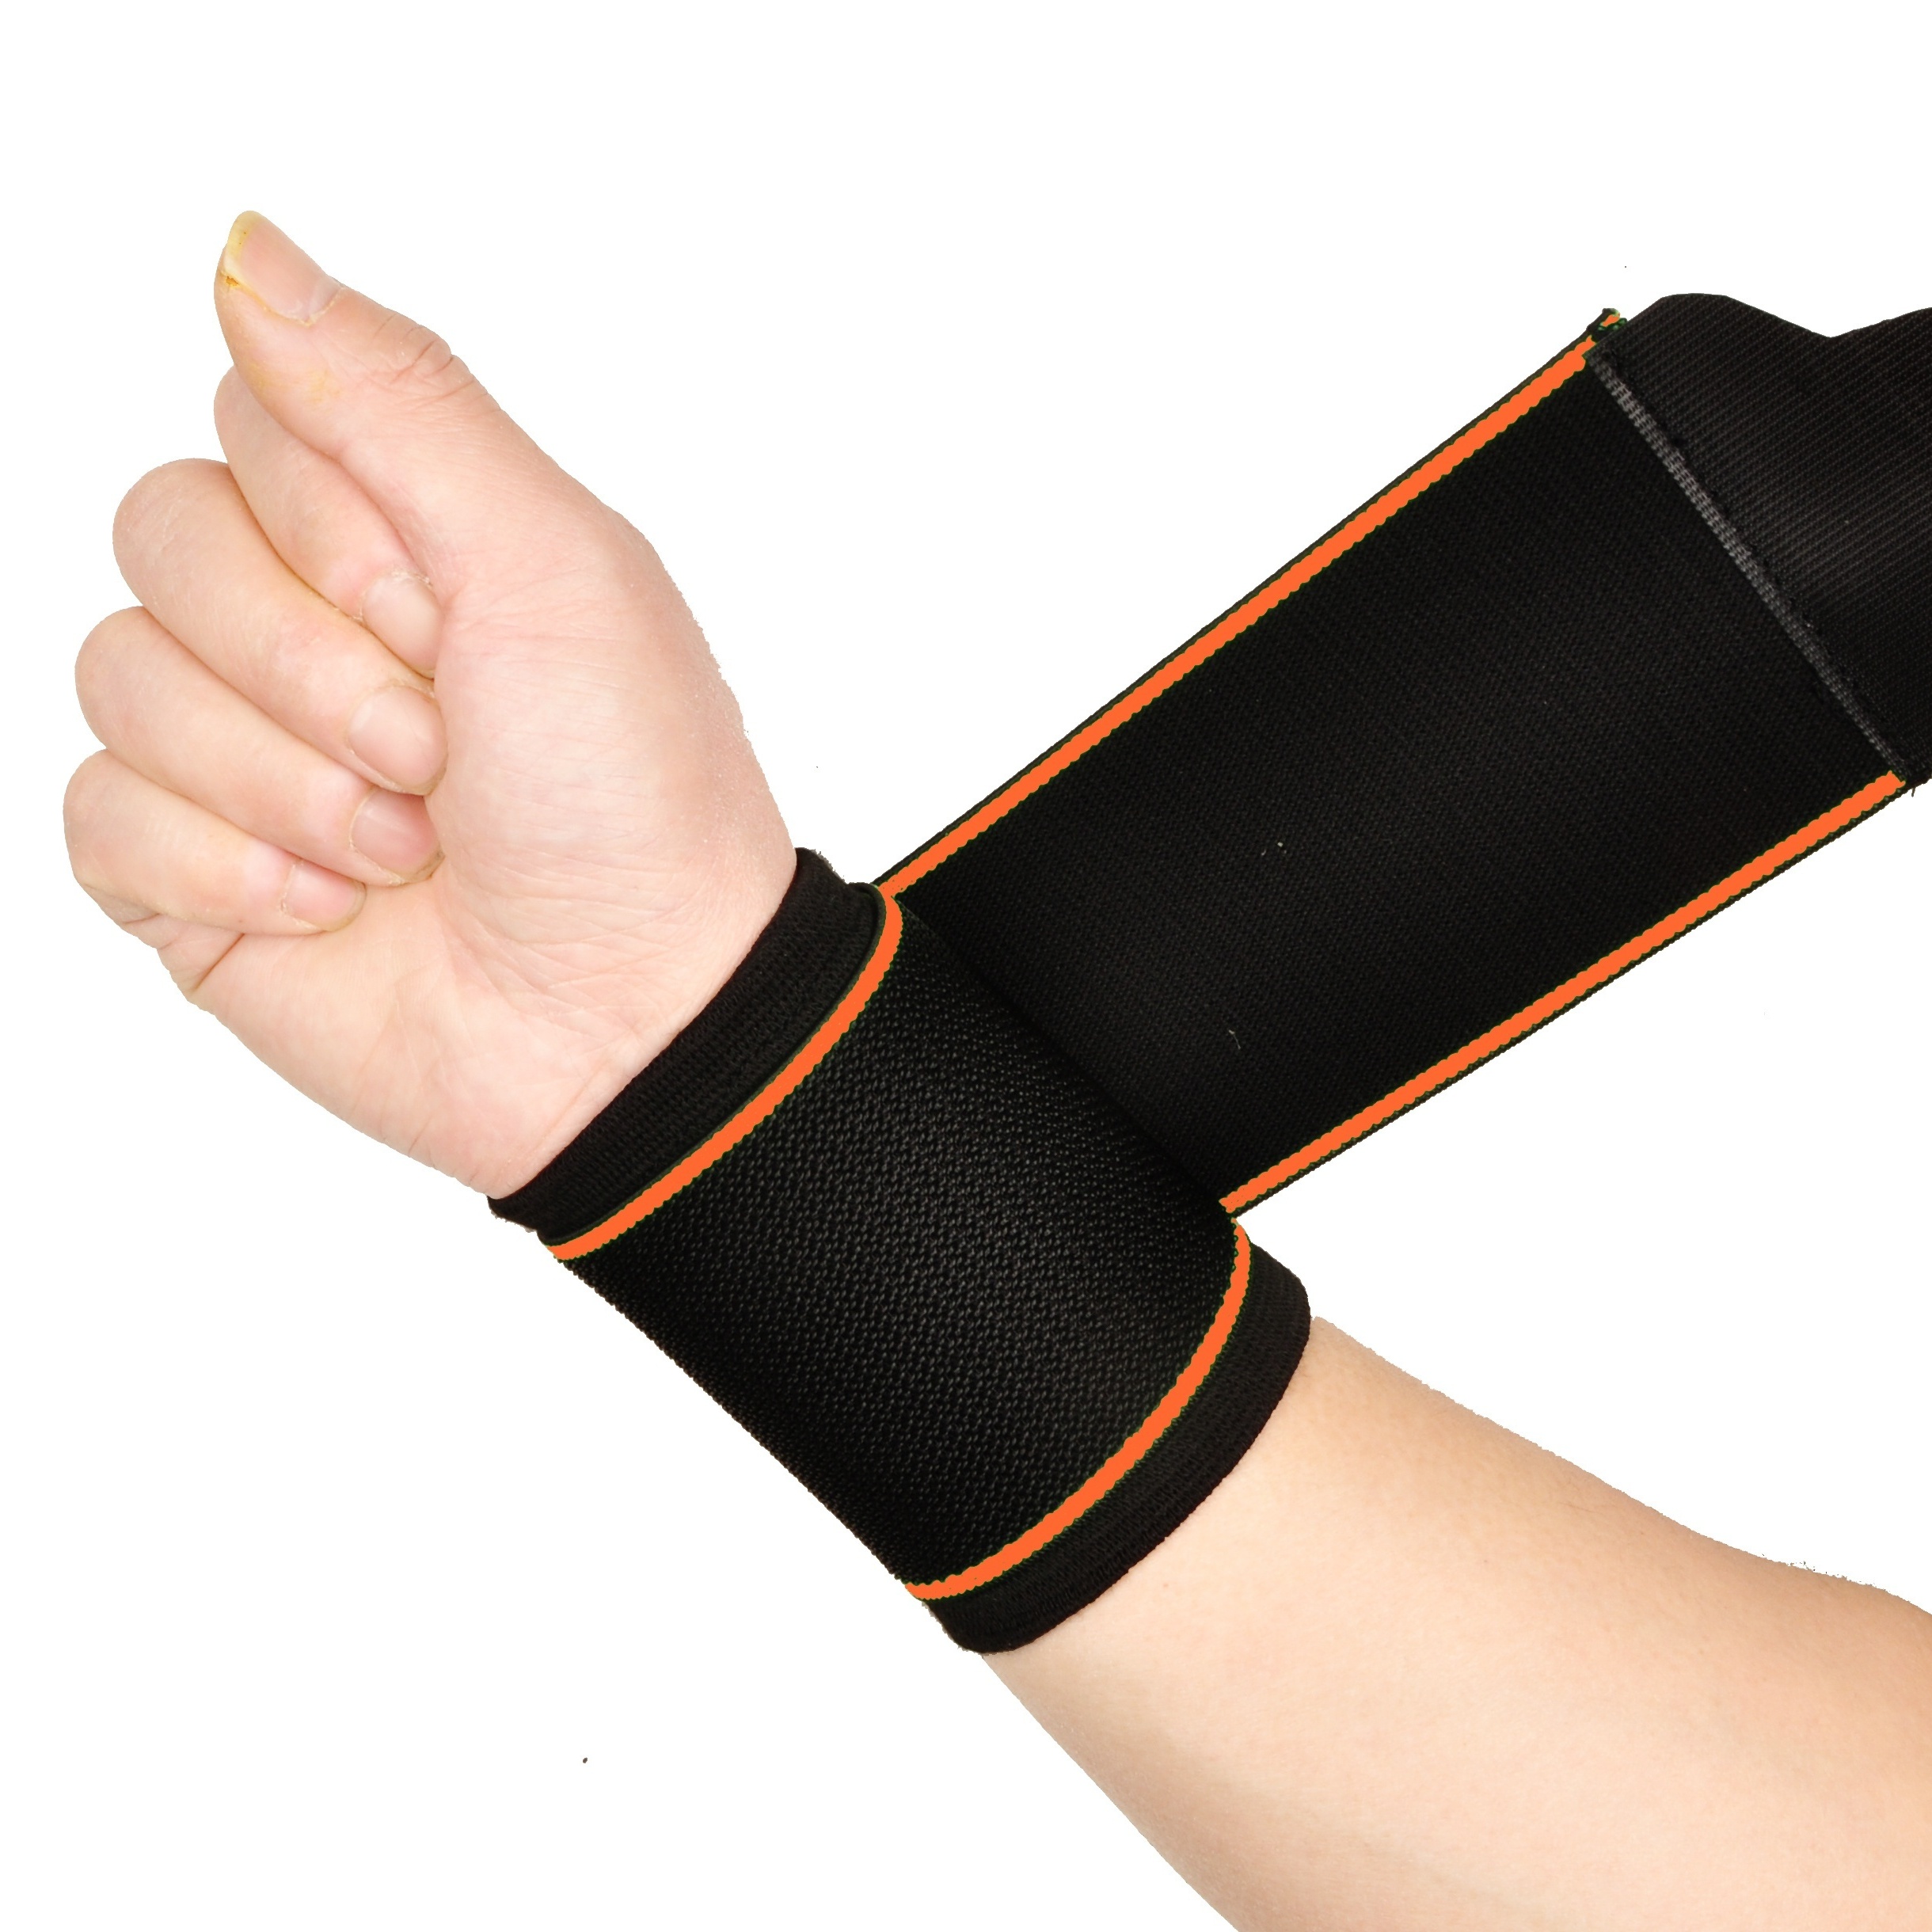  Elbow Sleeves (1 Pair) W/Wrist Wraps - Elbow Brace For Support  & Compression for Powerlifting, Weightlifting, Bench & Tendonitis - 5mm  Neoprene - For Men & Women : Health & Household